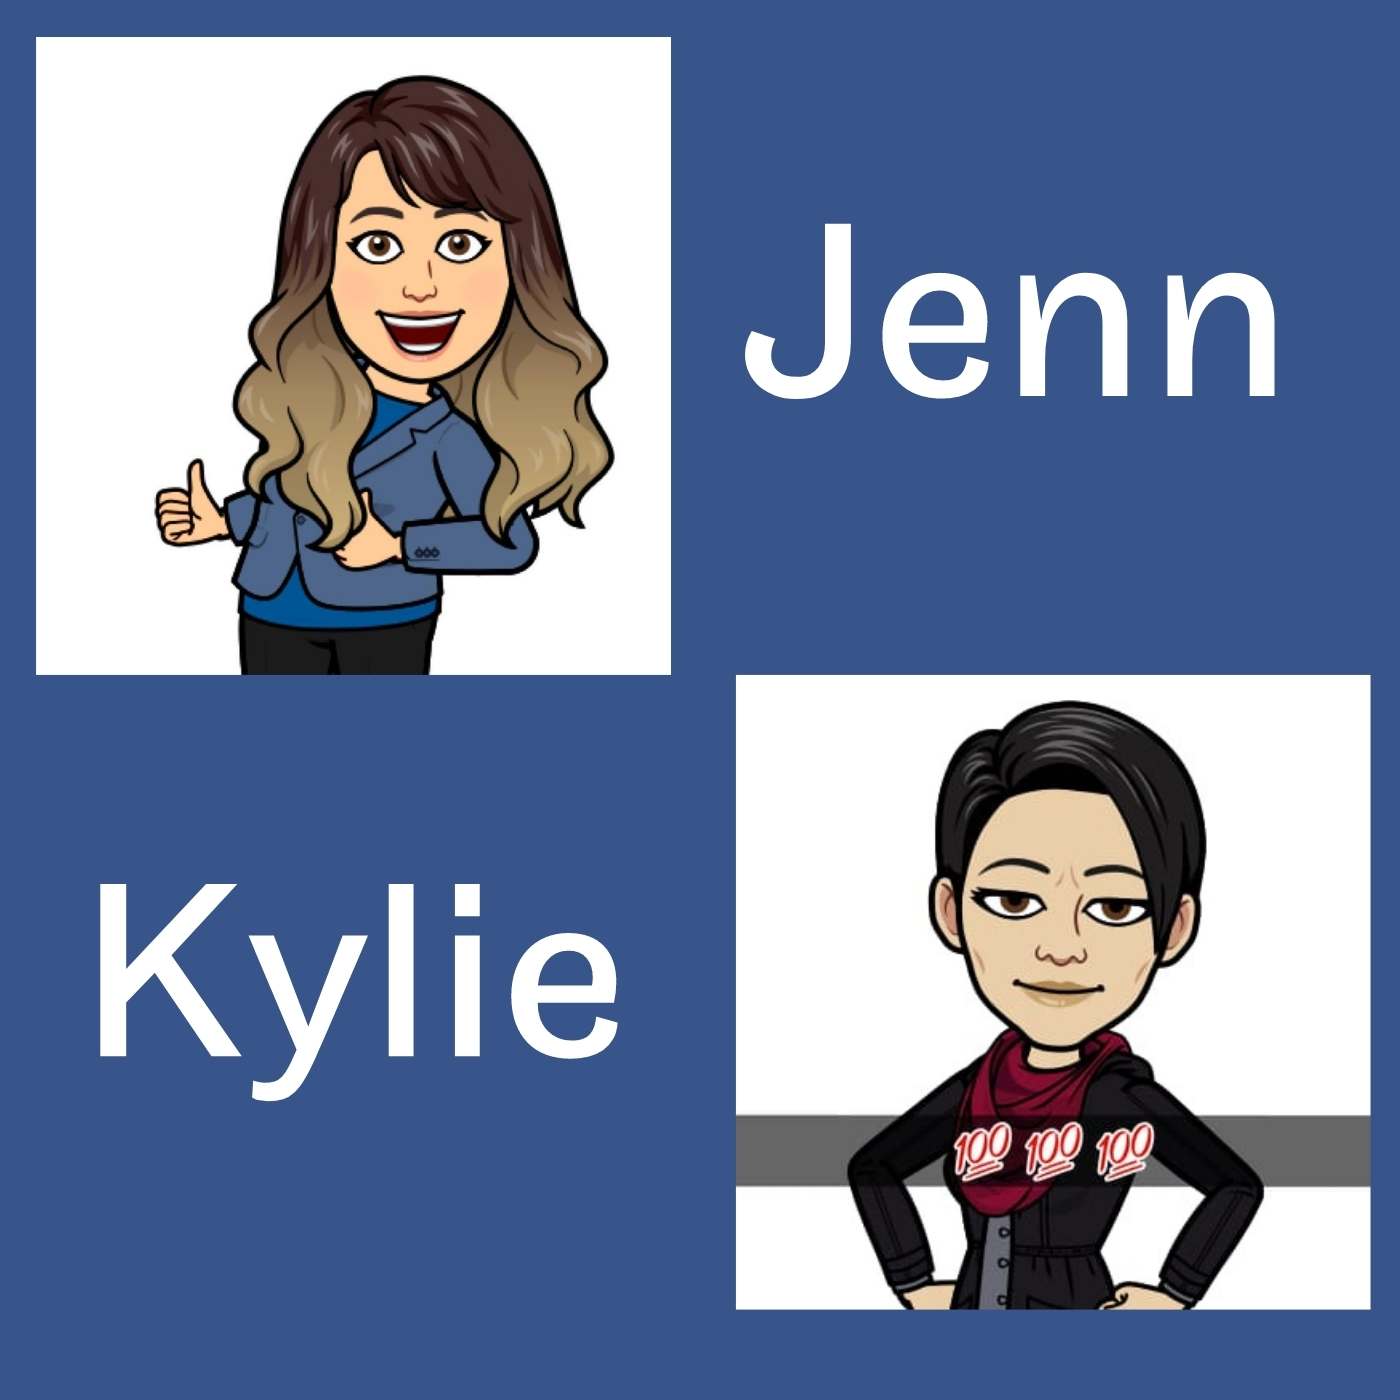 Episode 2: Jenn and Kylie part two